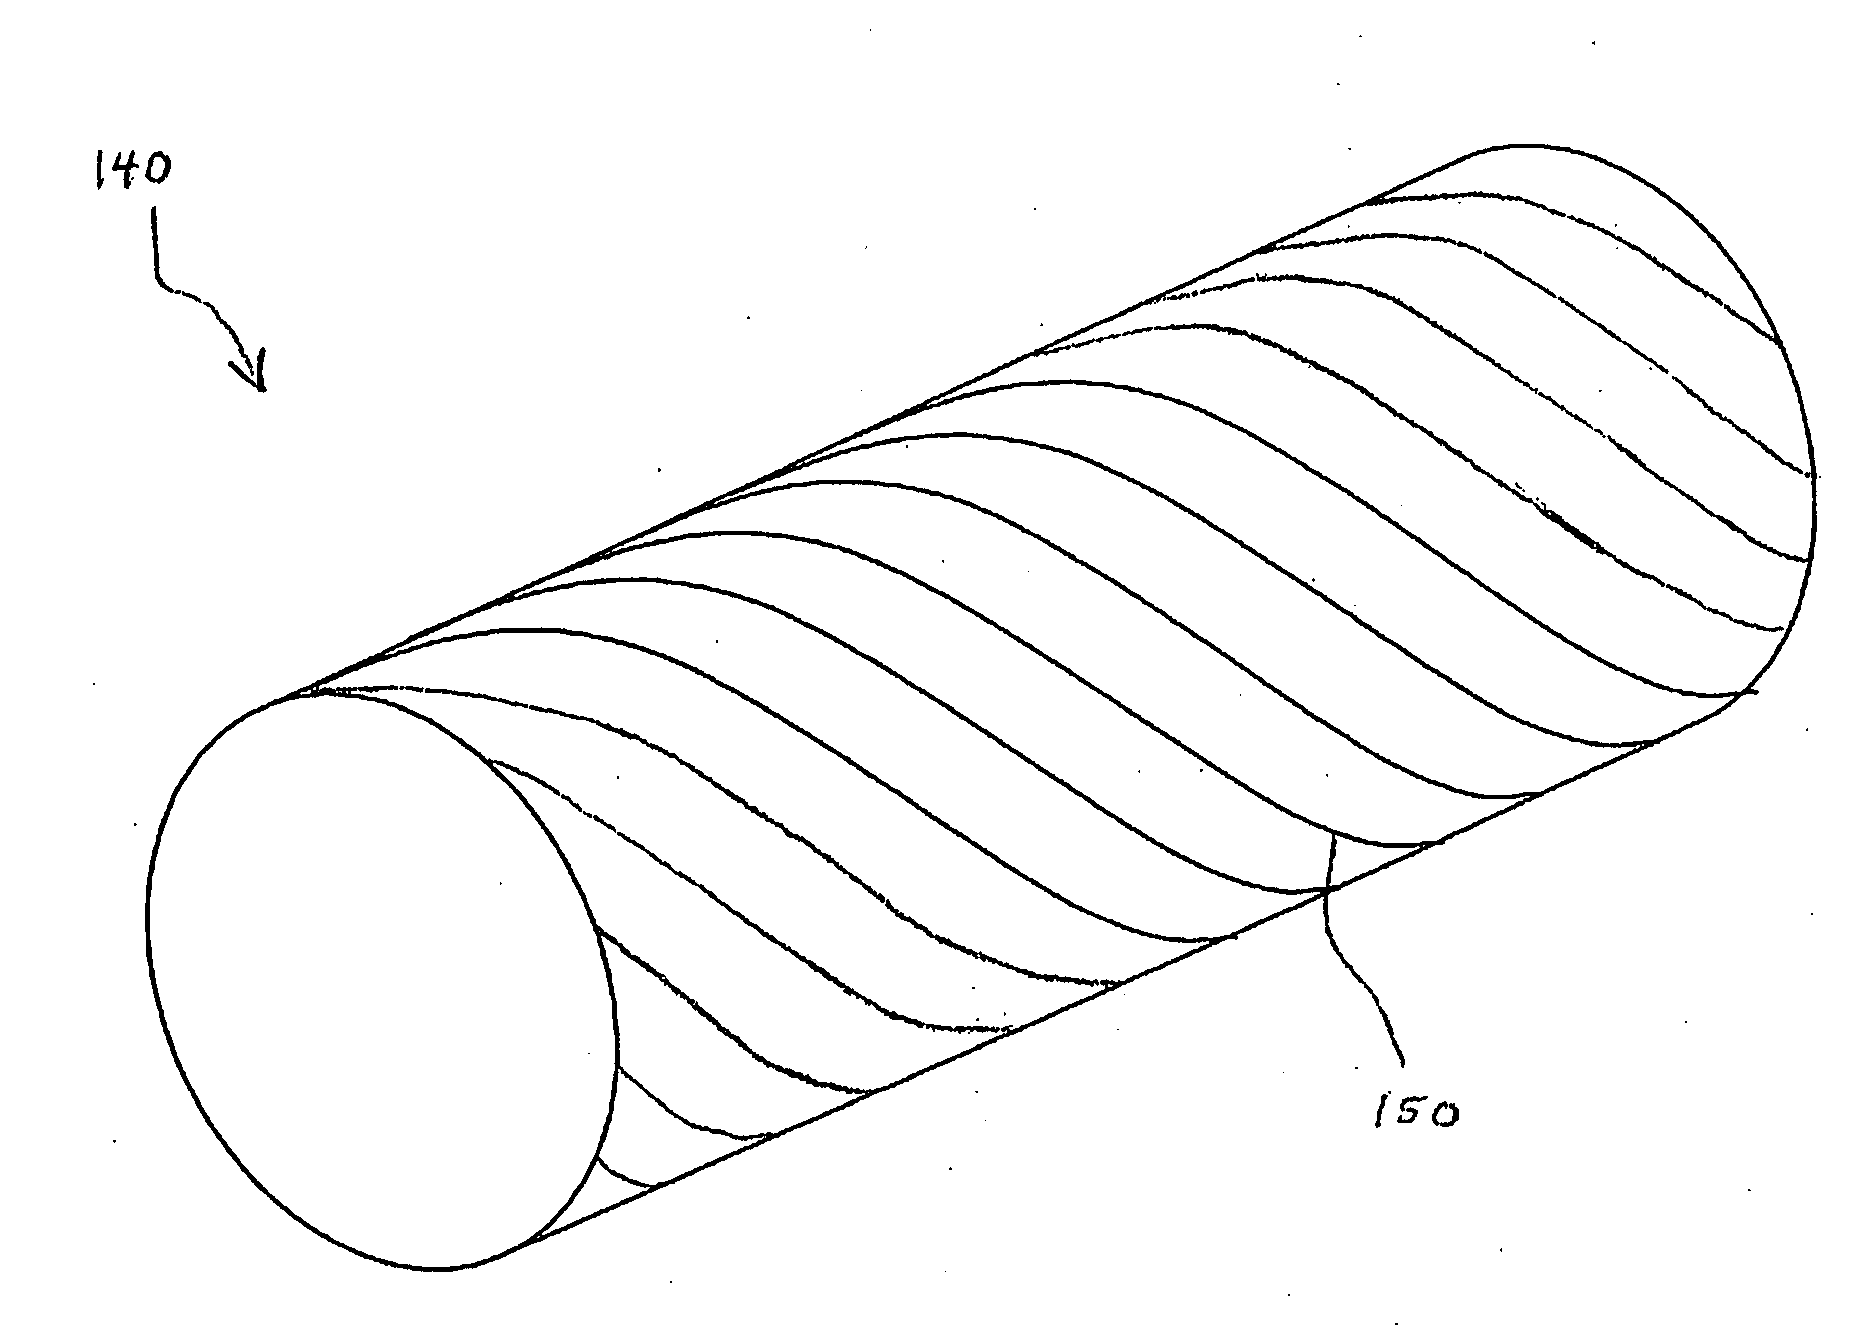 Process for making non-continuous articles with microstructures